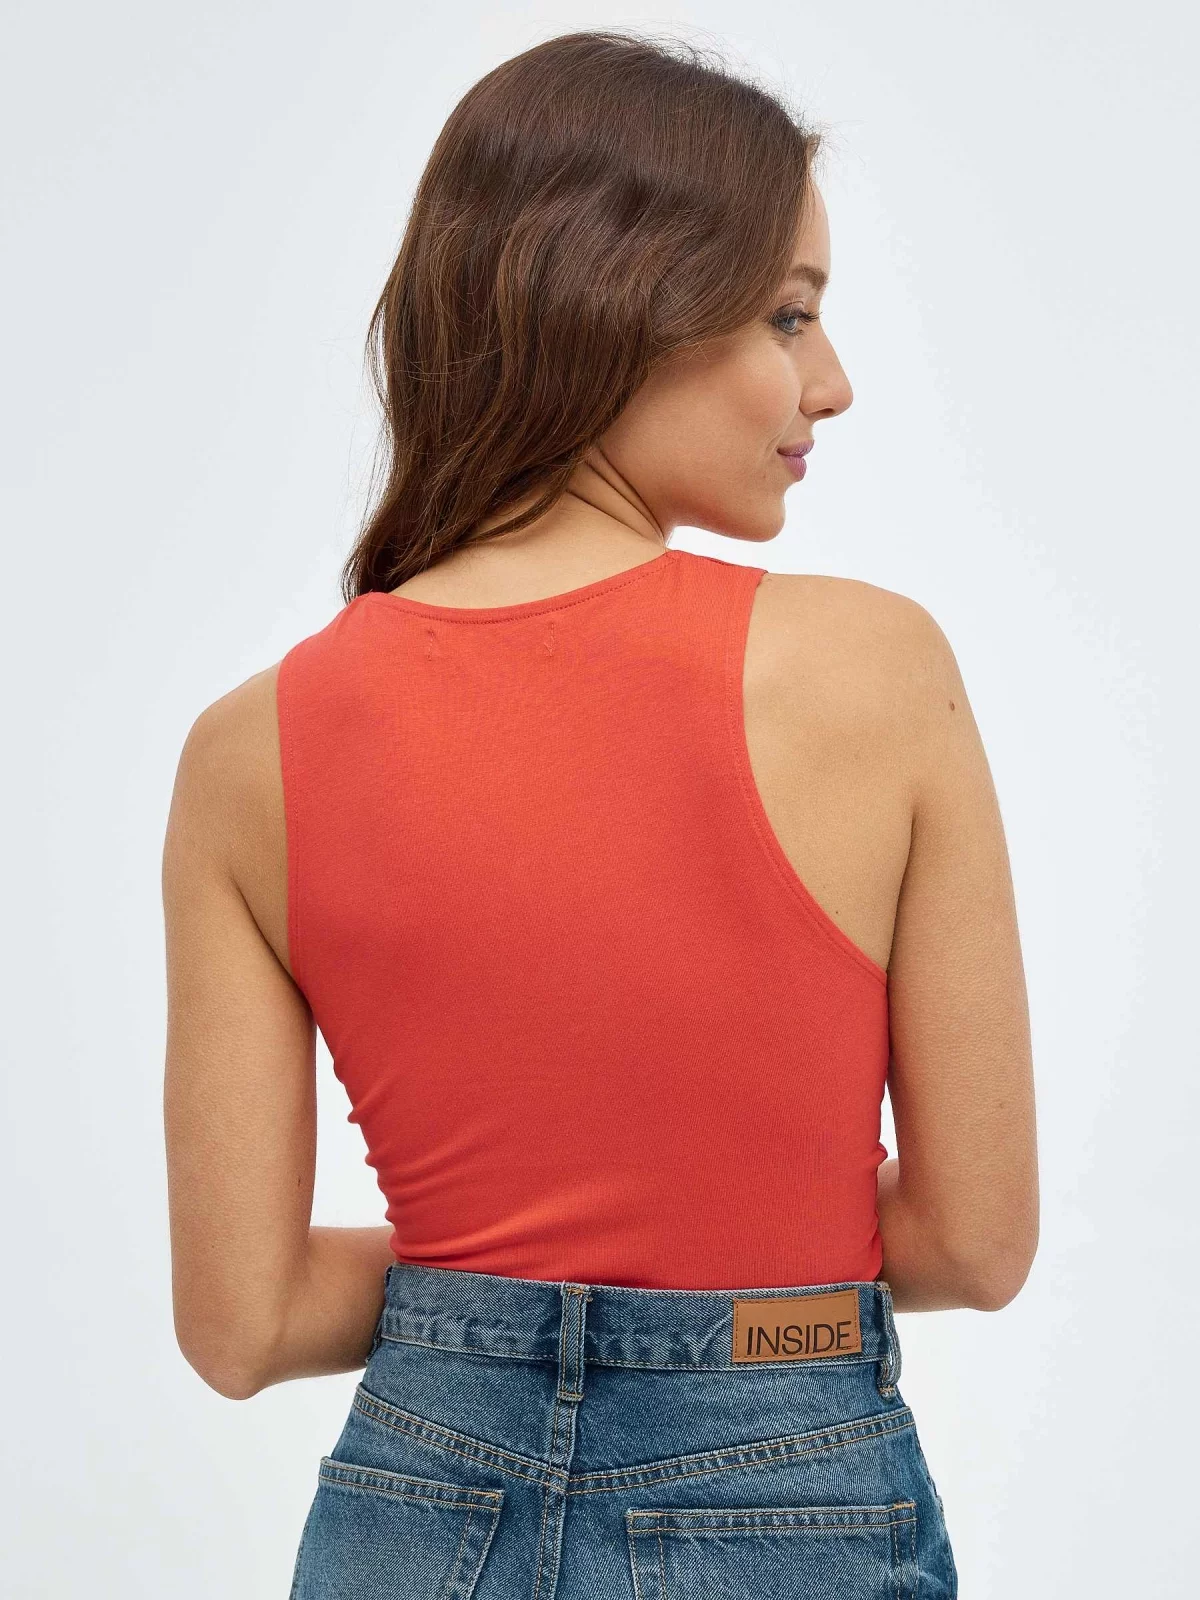 Crop top cut out red middle back view